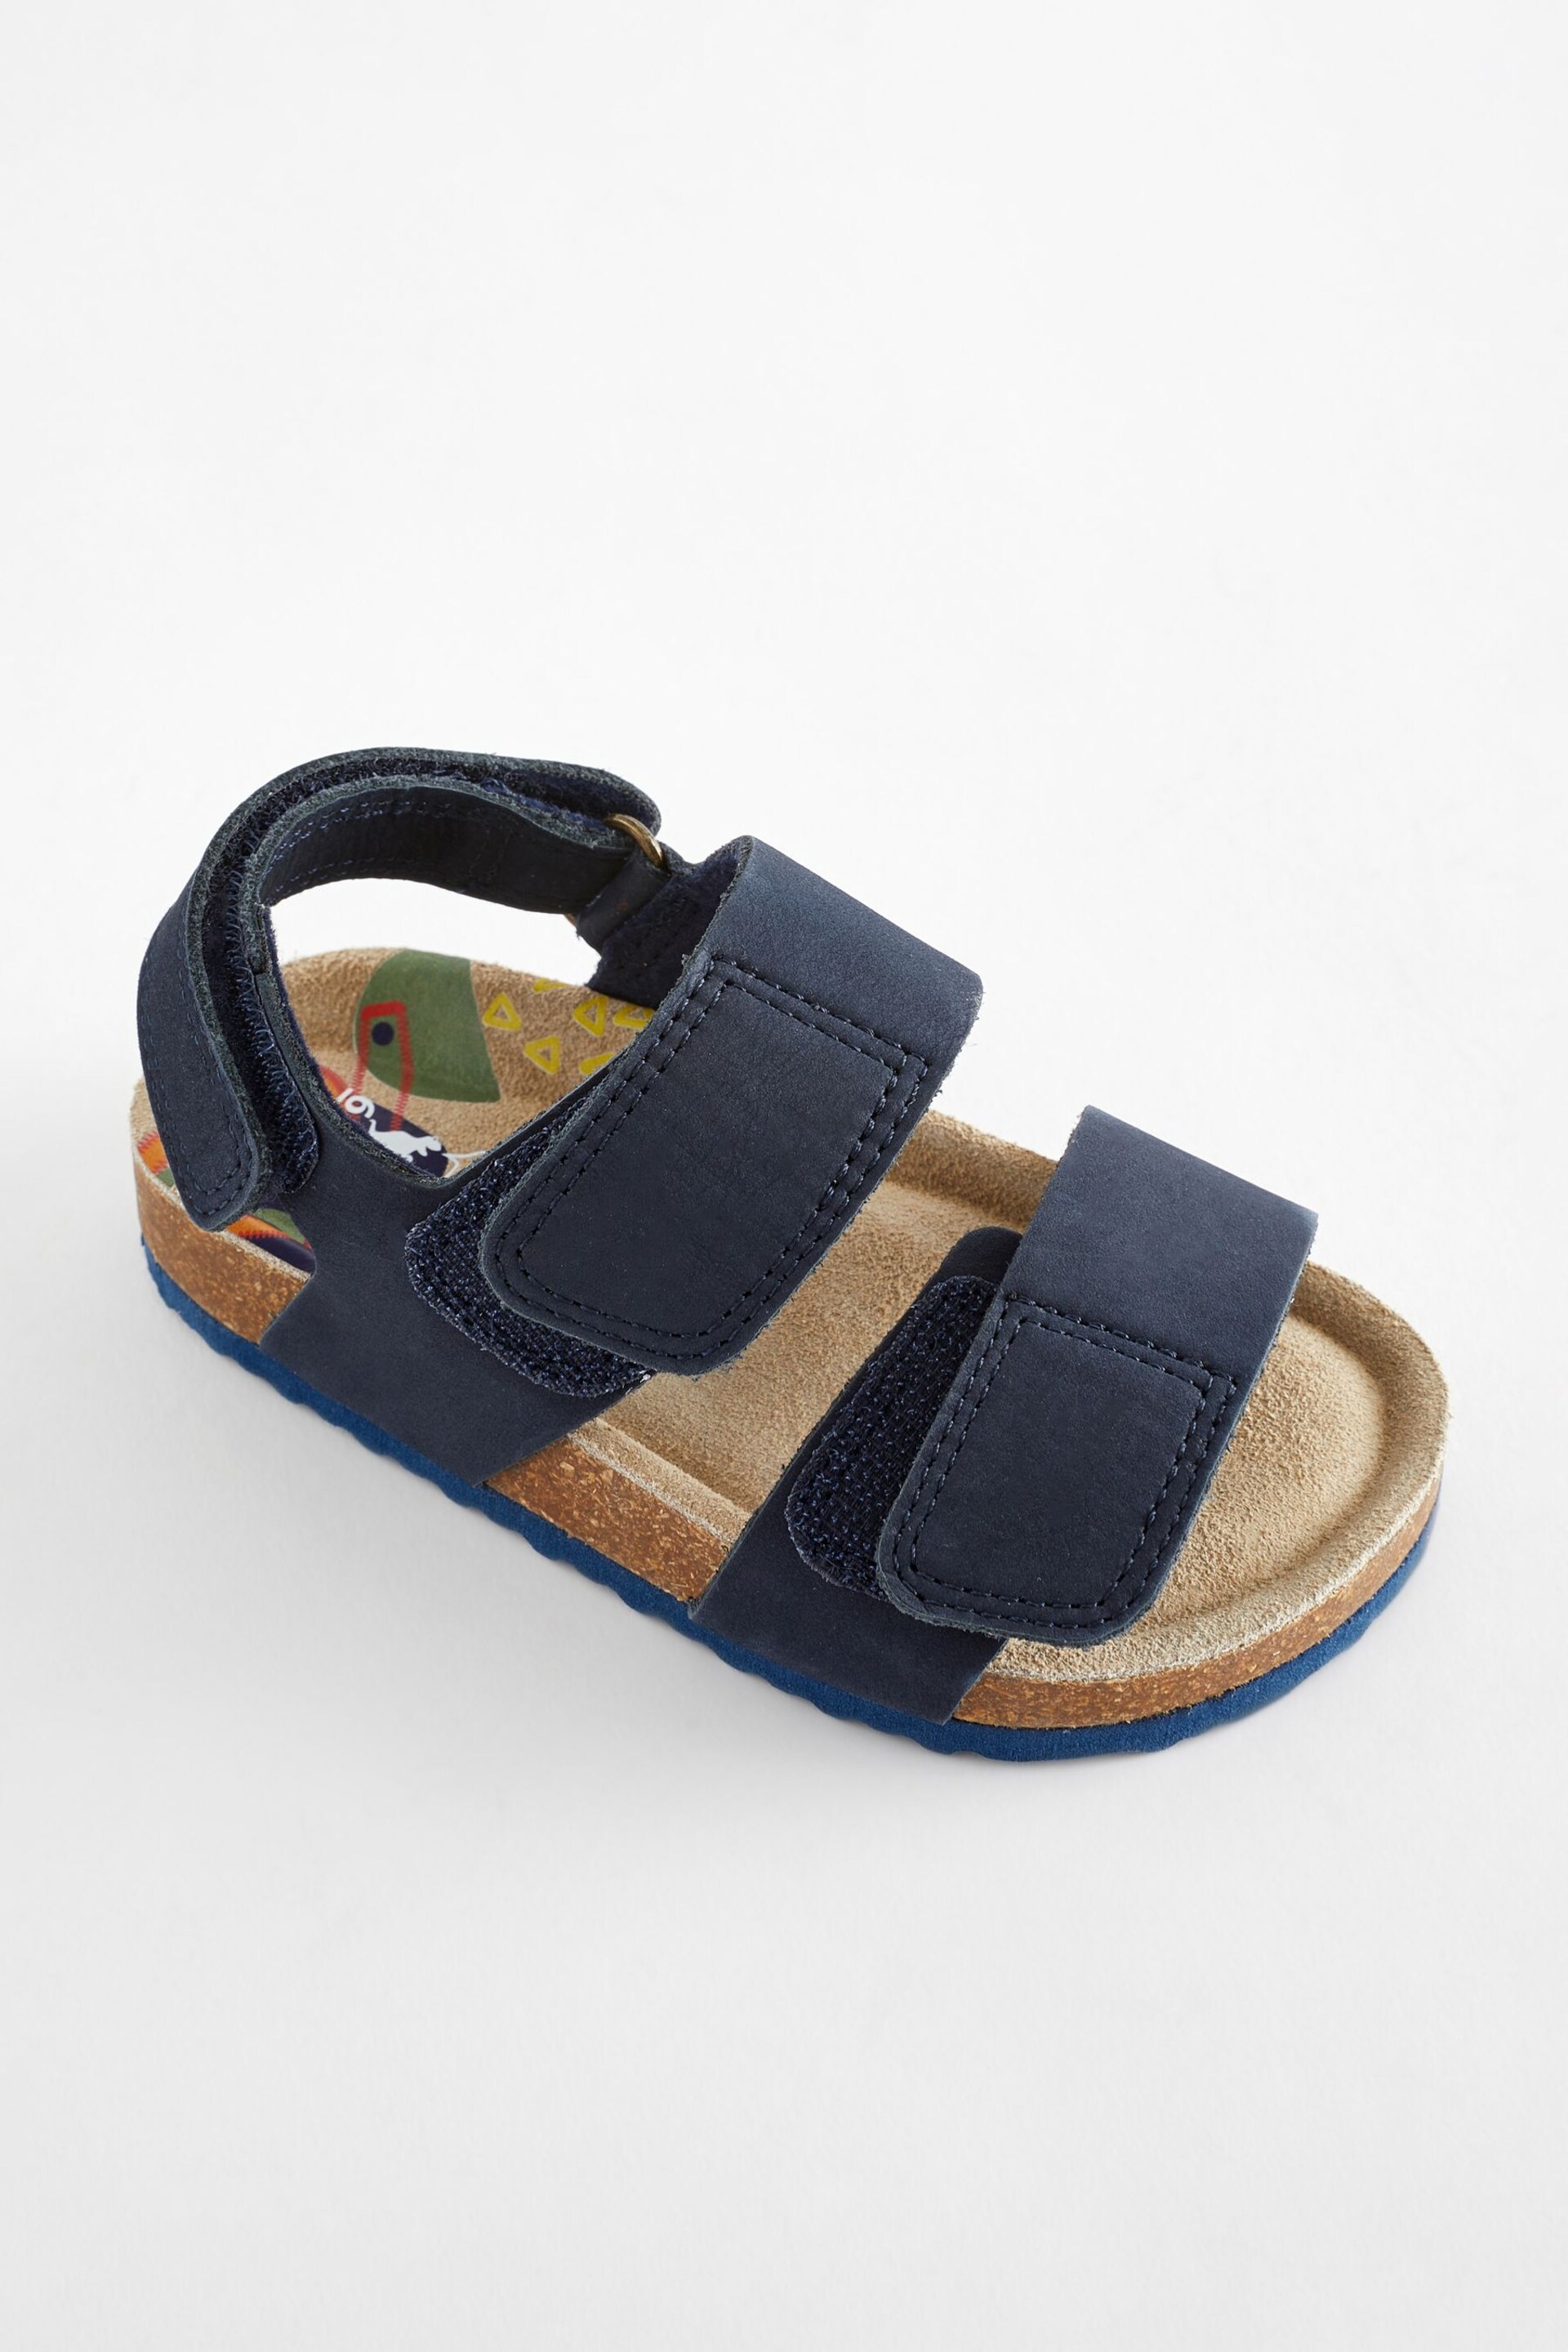 Navy Wide Fit (G) Leather Touch Fastening Corkbed Sandals - Image 3 of 6